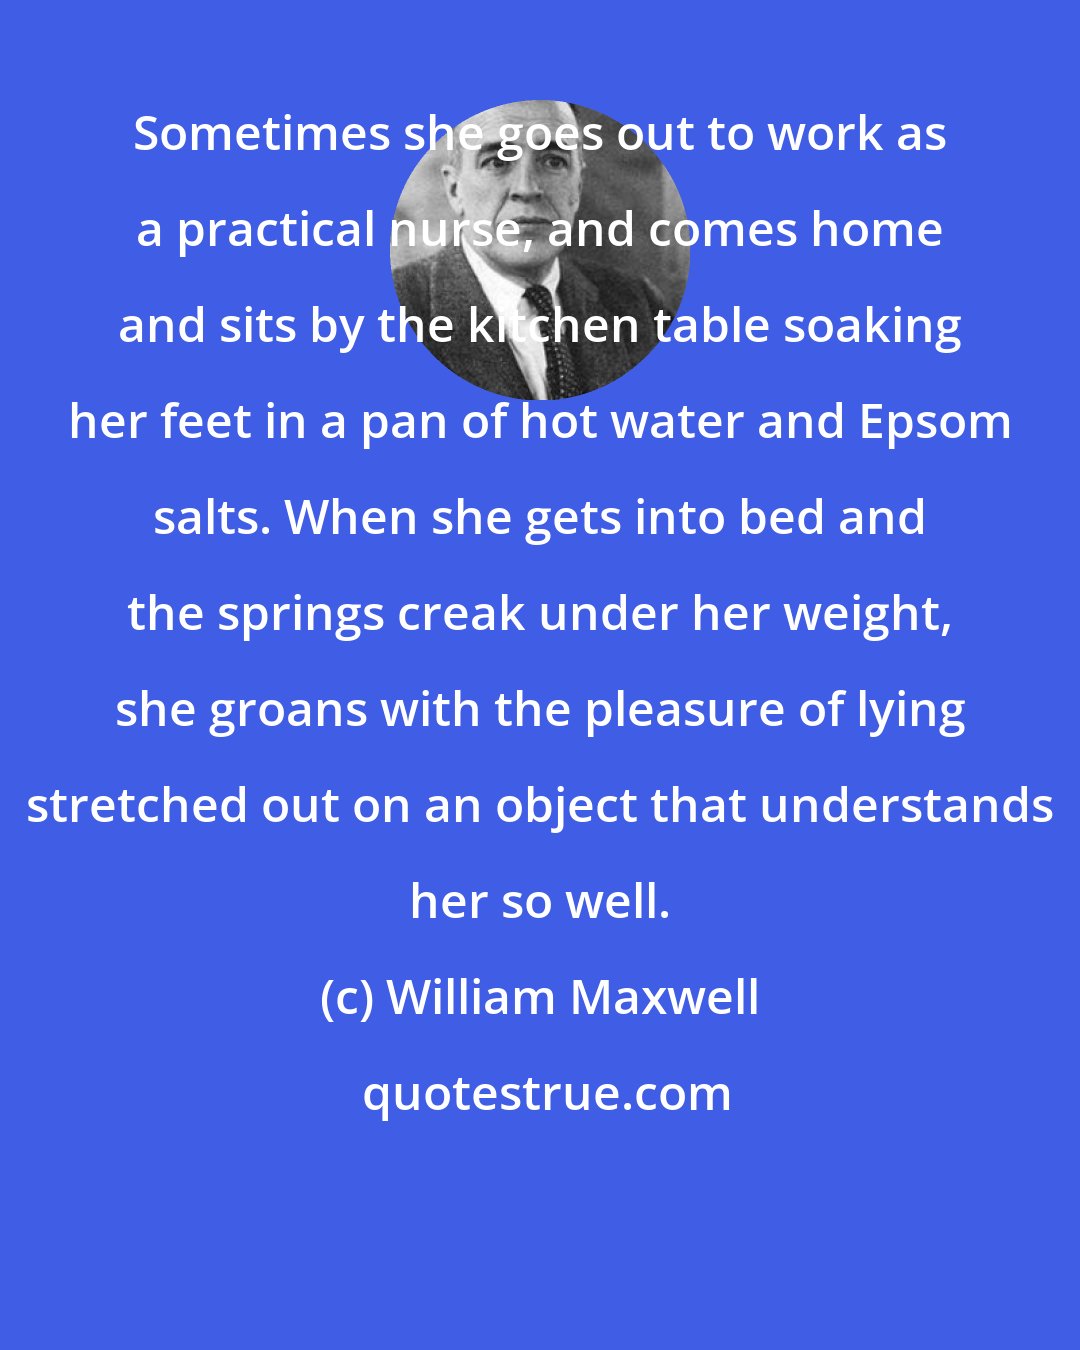 William Maxwell: Sometimes she goes out to work as a practical nurse, and comes home and sits by the kitchen table soaking her feet in a pan of hot water and Epsom salts. When she gets into bed and the springs creak under her weight, she groans with the pleasure of lying stretched out on an object that understands her so well.